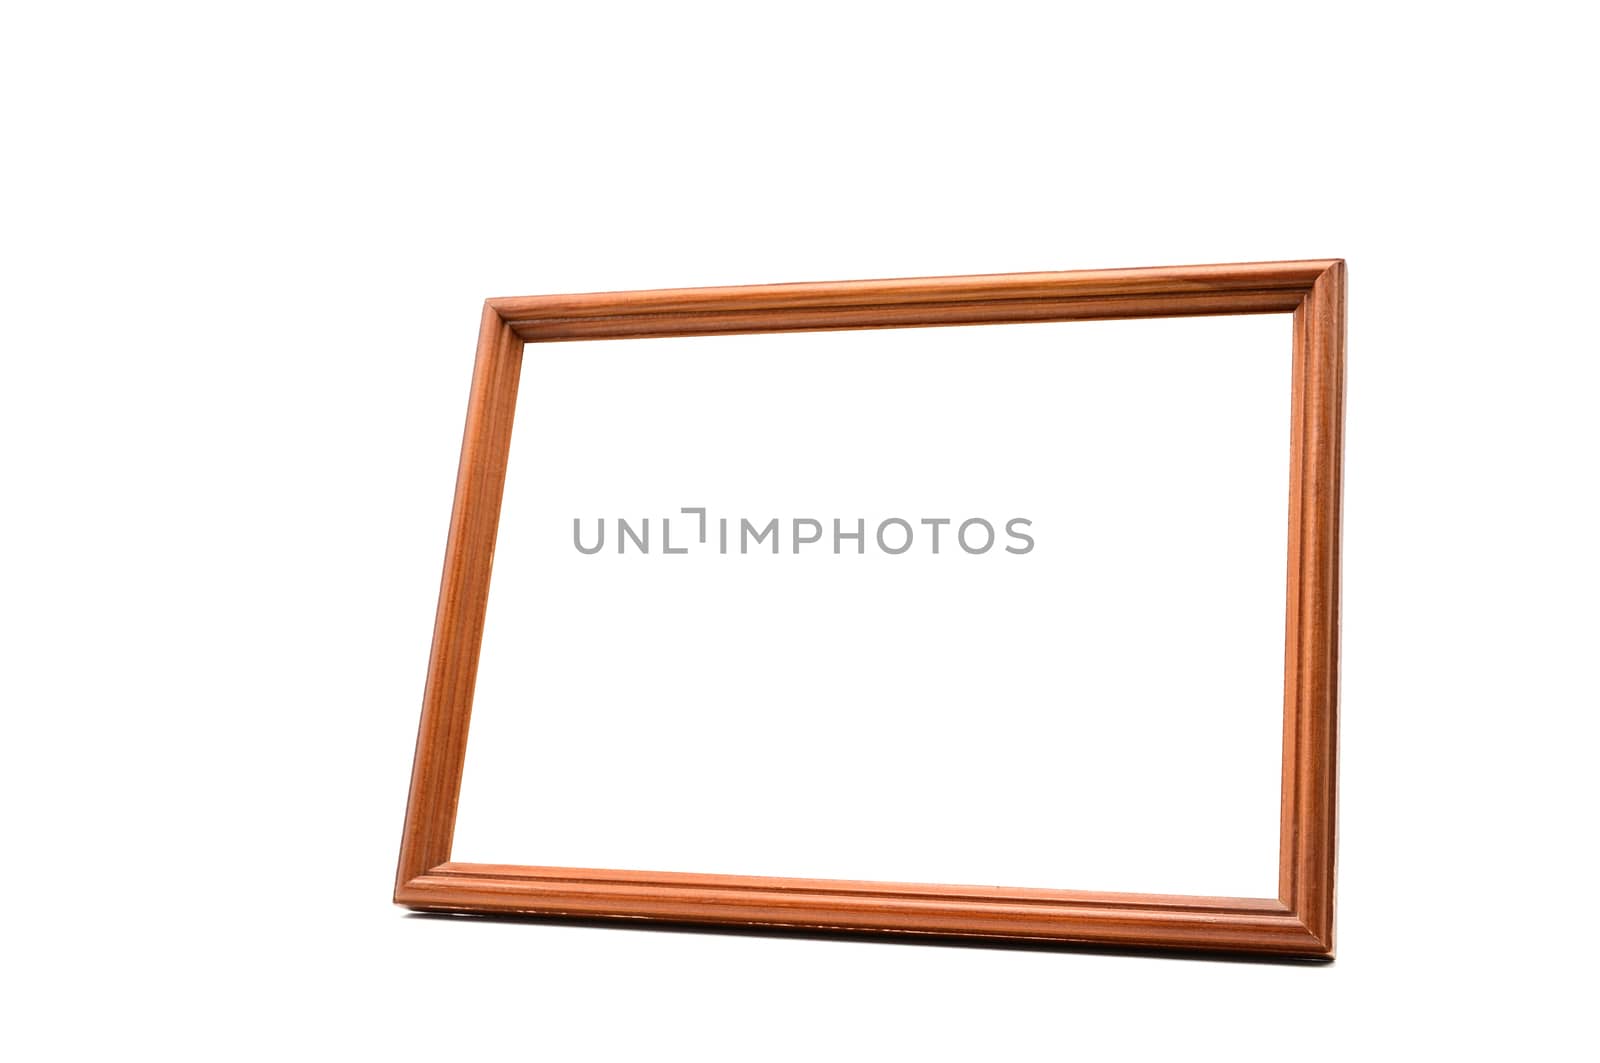 Antique wooden photo frame on an isolated white background by moviephoto